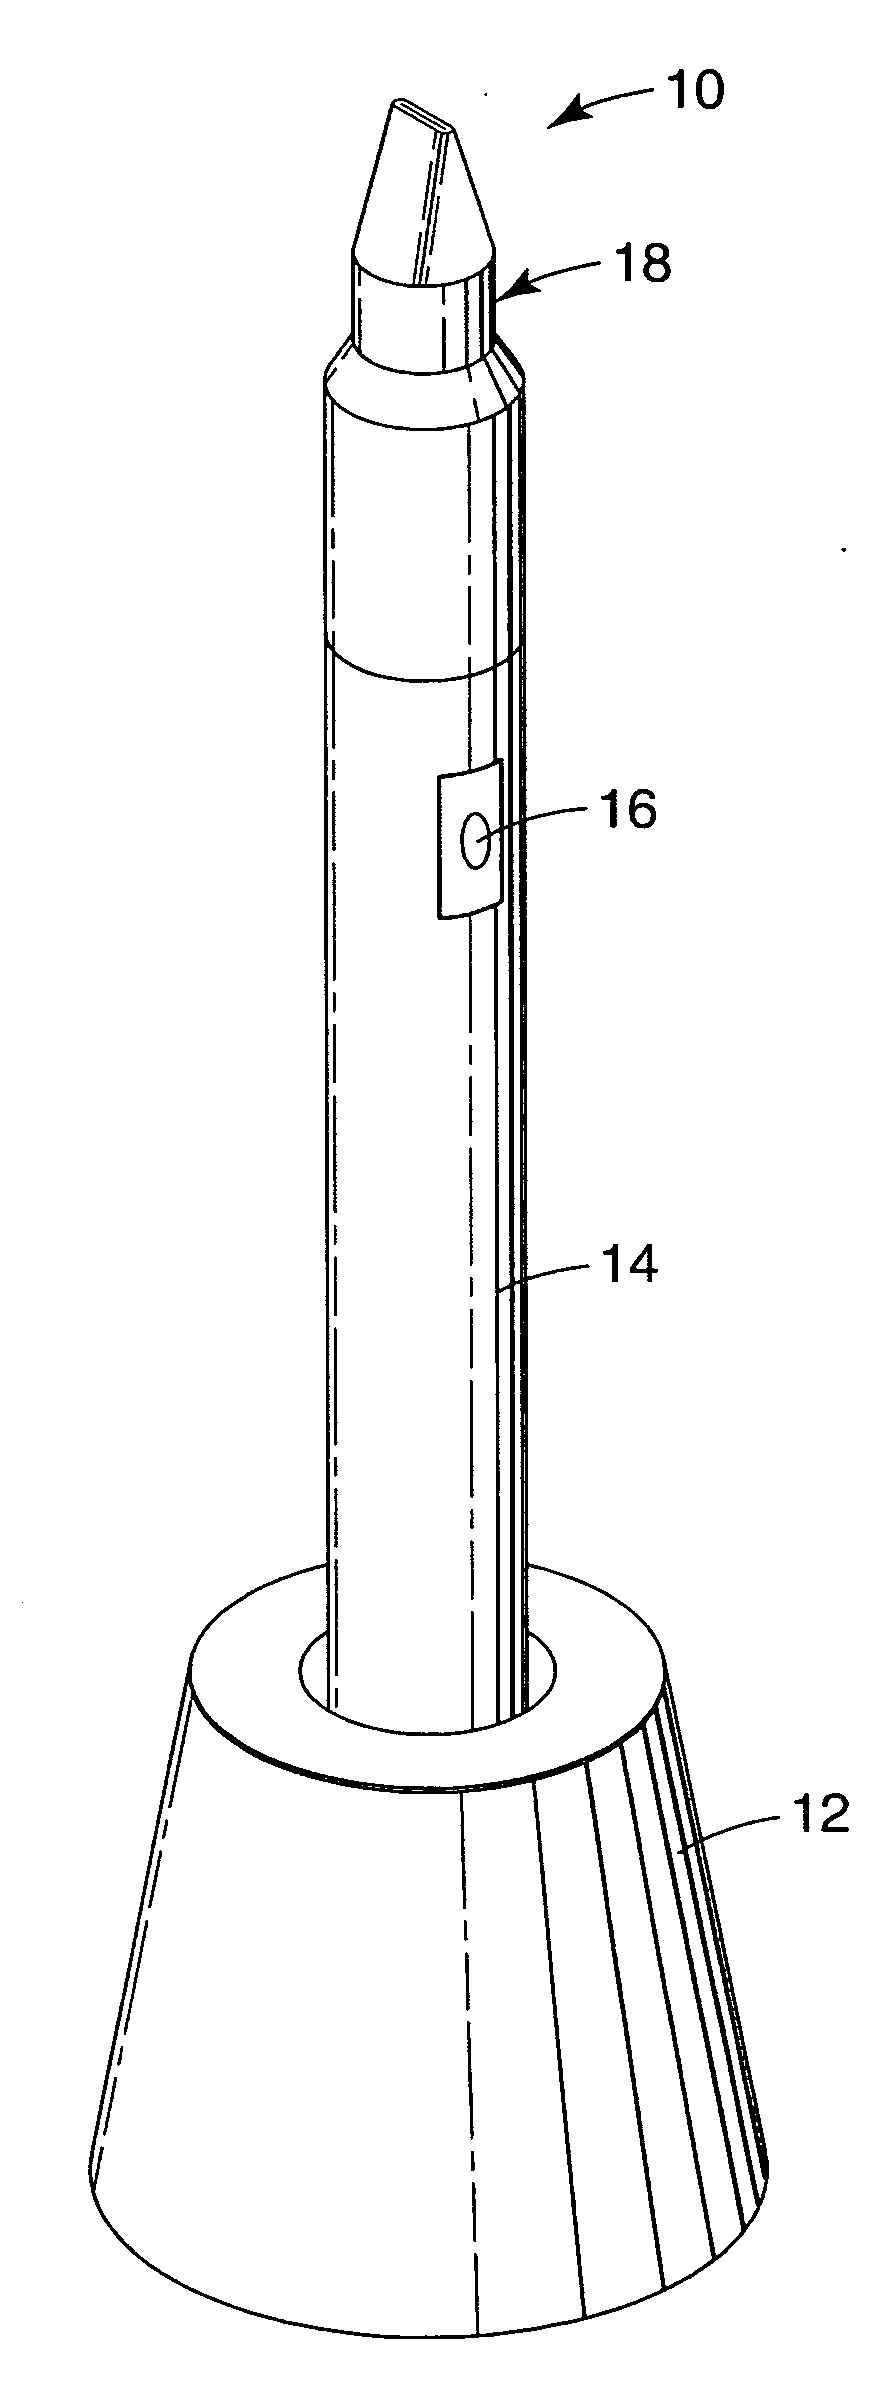 Processes for forming dental materials and device